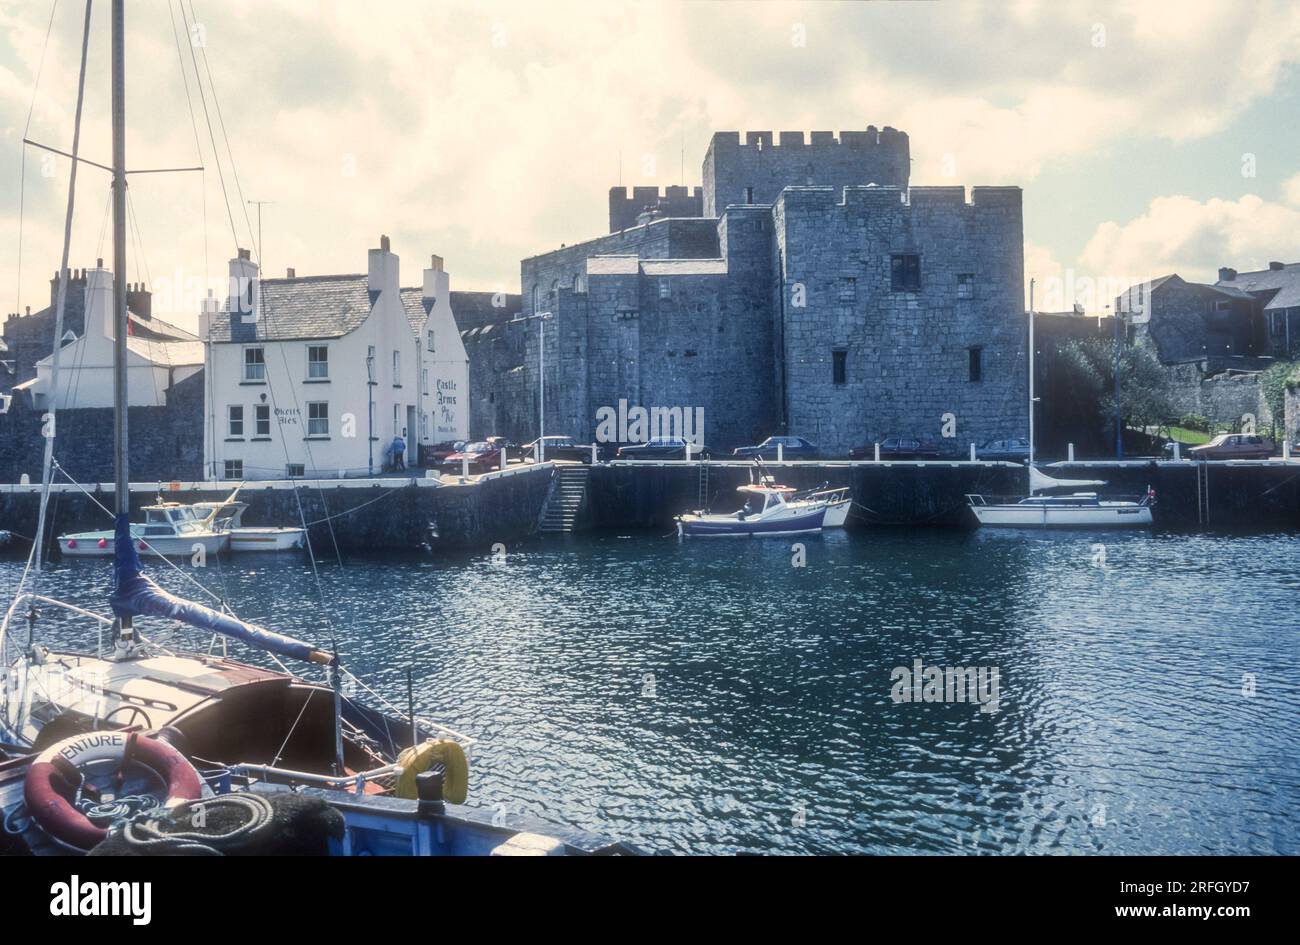 1989 archive photograph of Castle Rushen and the Castle Arms seen across the harbour at Castletown on the Isle of Man. Stock Photo